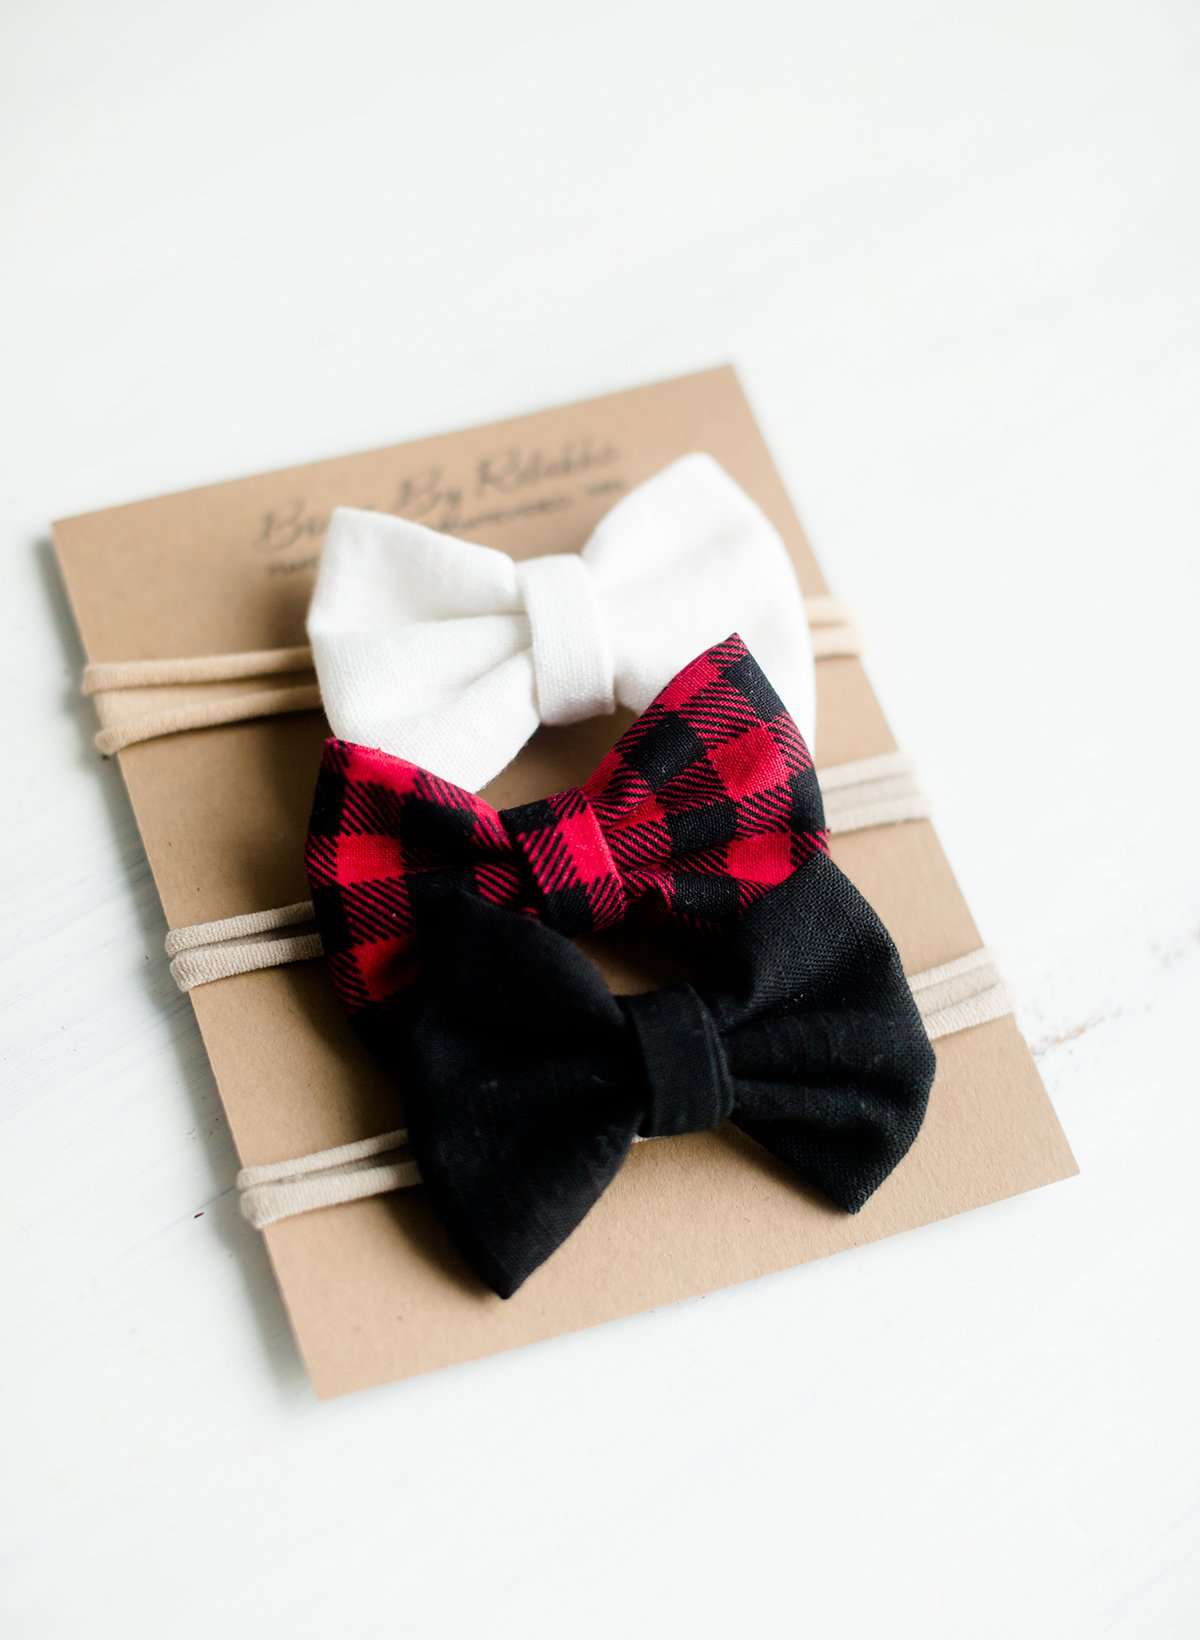 Buffalo check headbands that are white, red and black. Nylon headband or a alligator style clip.